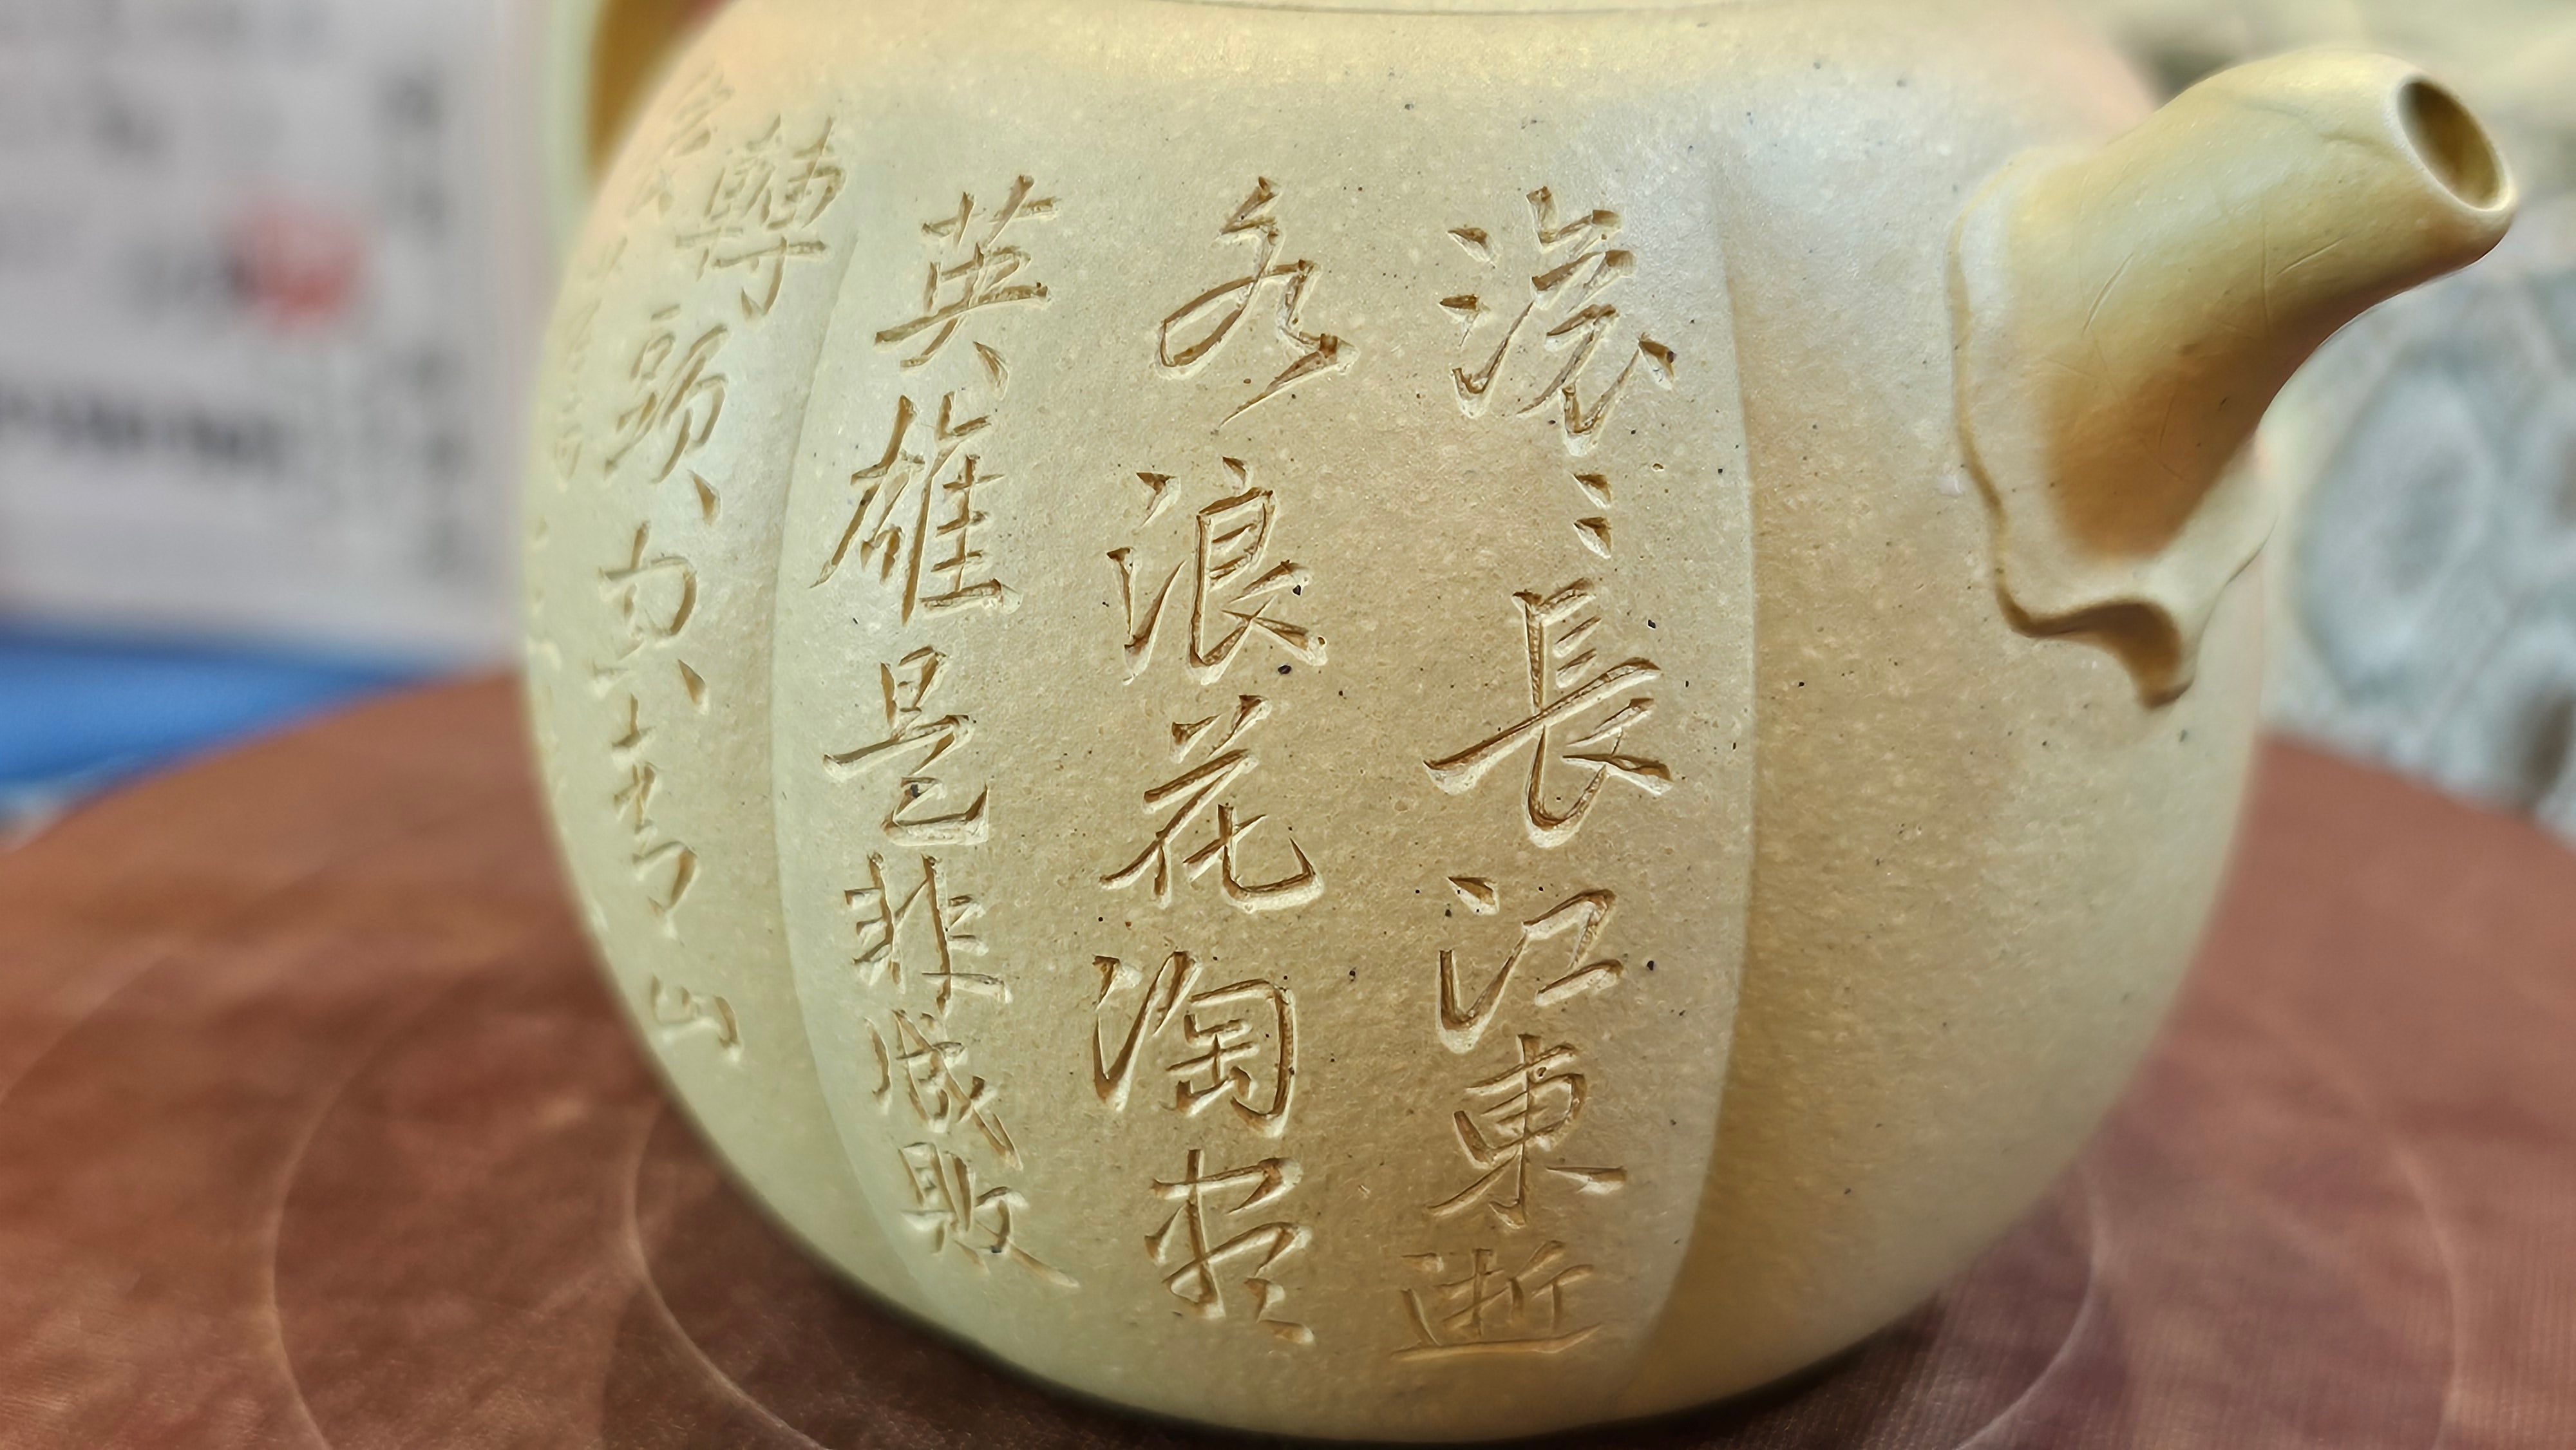 Commissioned work for Mr Tien.N. : ZiSha work "Tian Gua" 210ml, made with Cao Family's 100% BenShan LüNi 本山绿泥, crafted by L4 Assoc Master Artist Zhang Ke 助理工艺美术师, 张轲。Frame 1 with video.